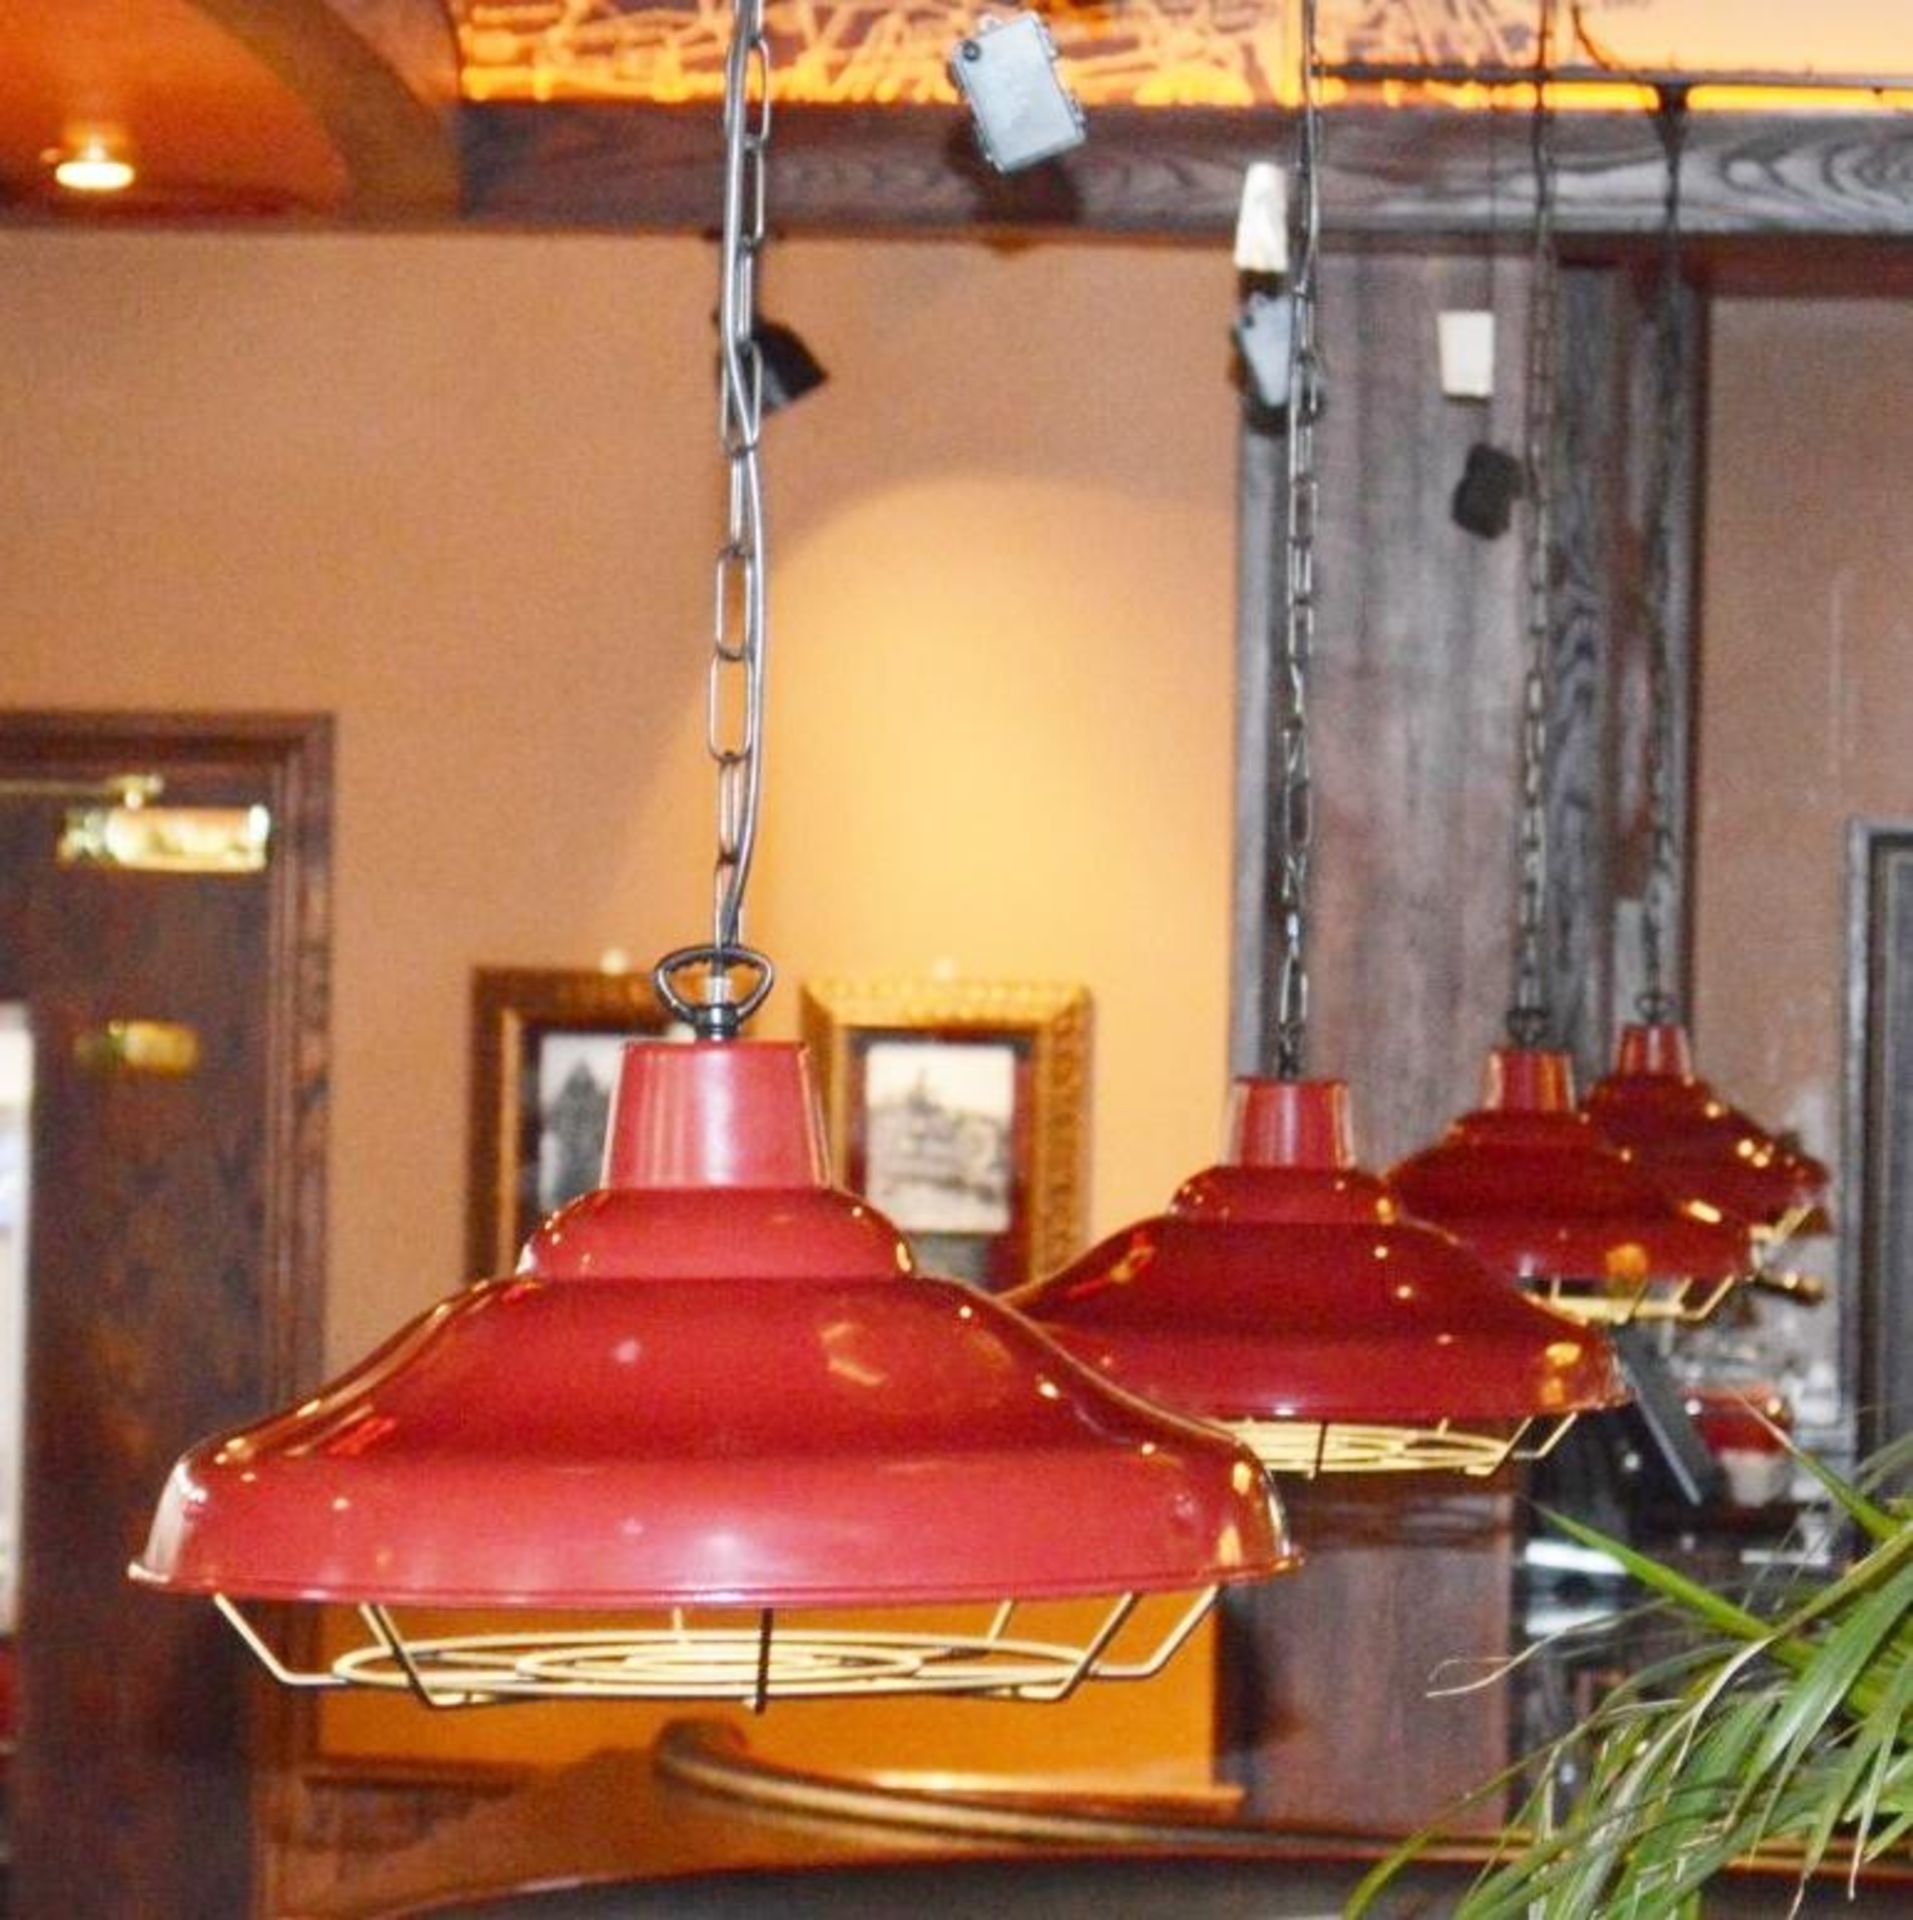 5 x Red Industrial Style Pendant Light Fittings With Black Chain and Cage - Manufactured by Northern